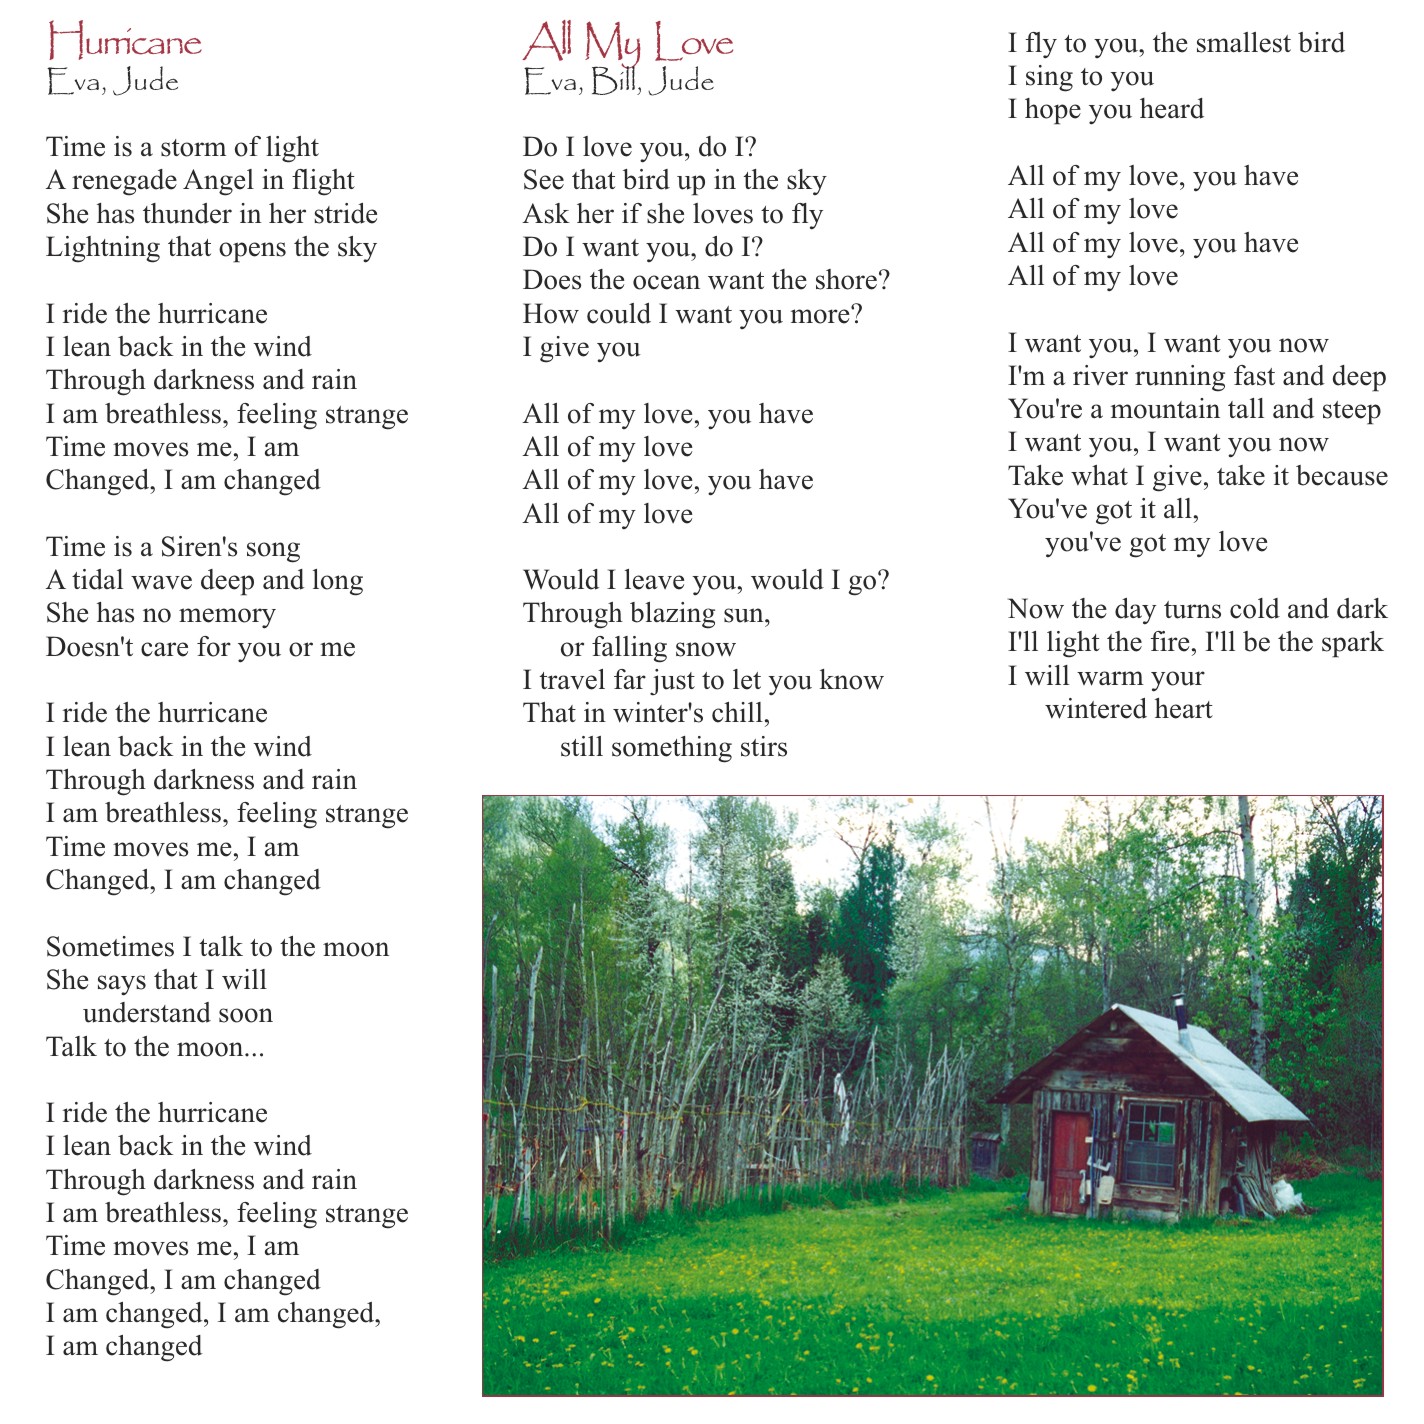 Eva Tree - Sail Away - CD Booklet, Page 3, "Hurricane", "All My Love"